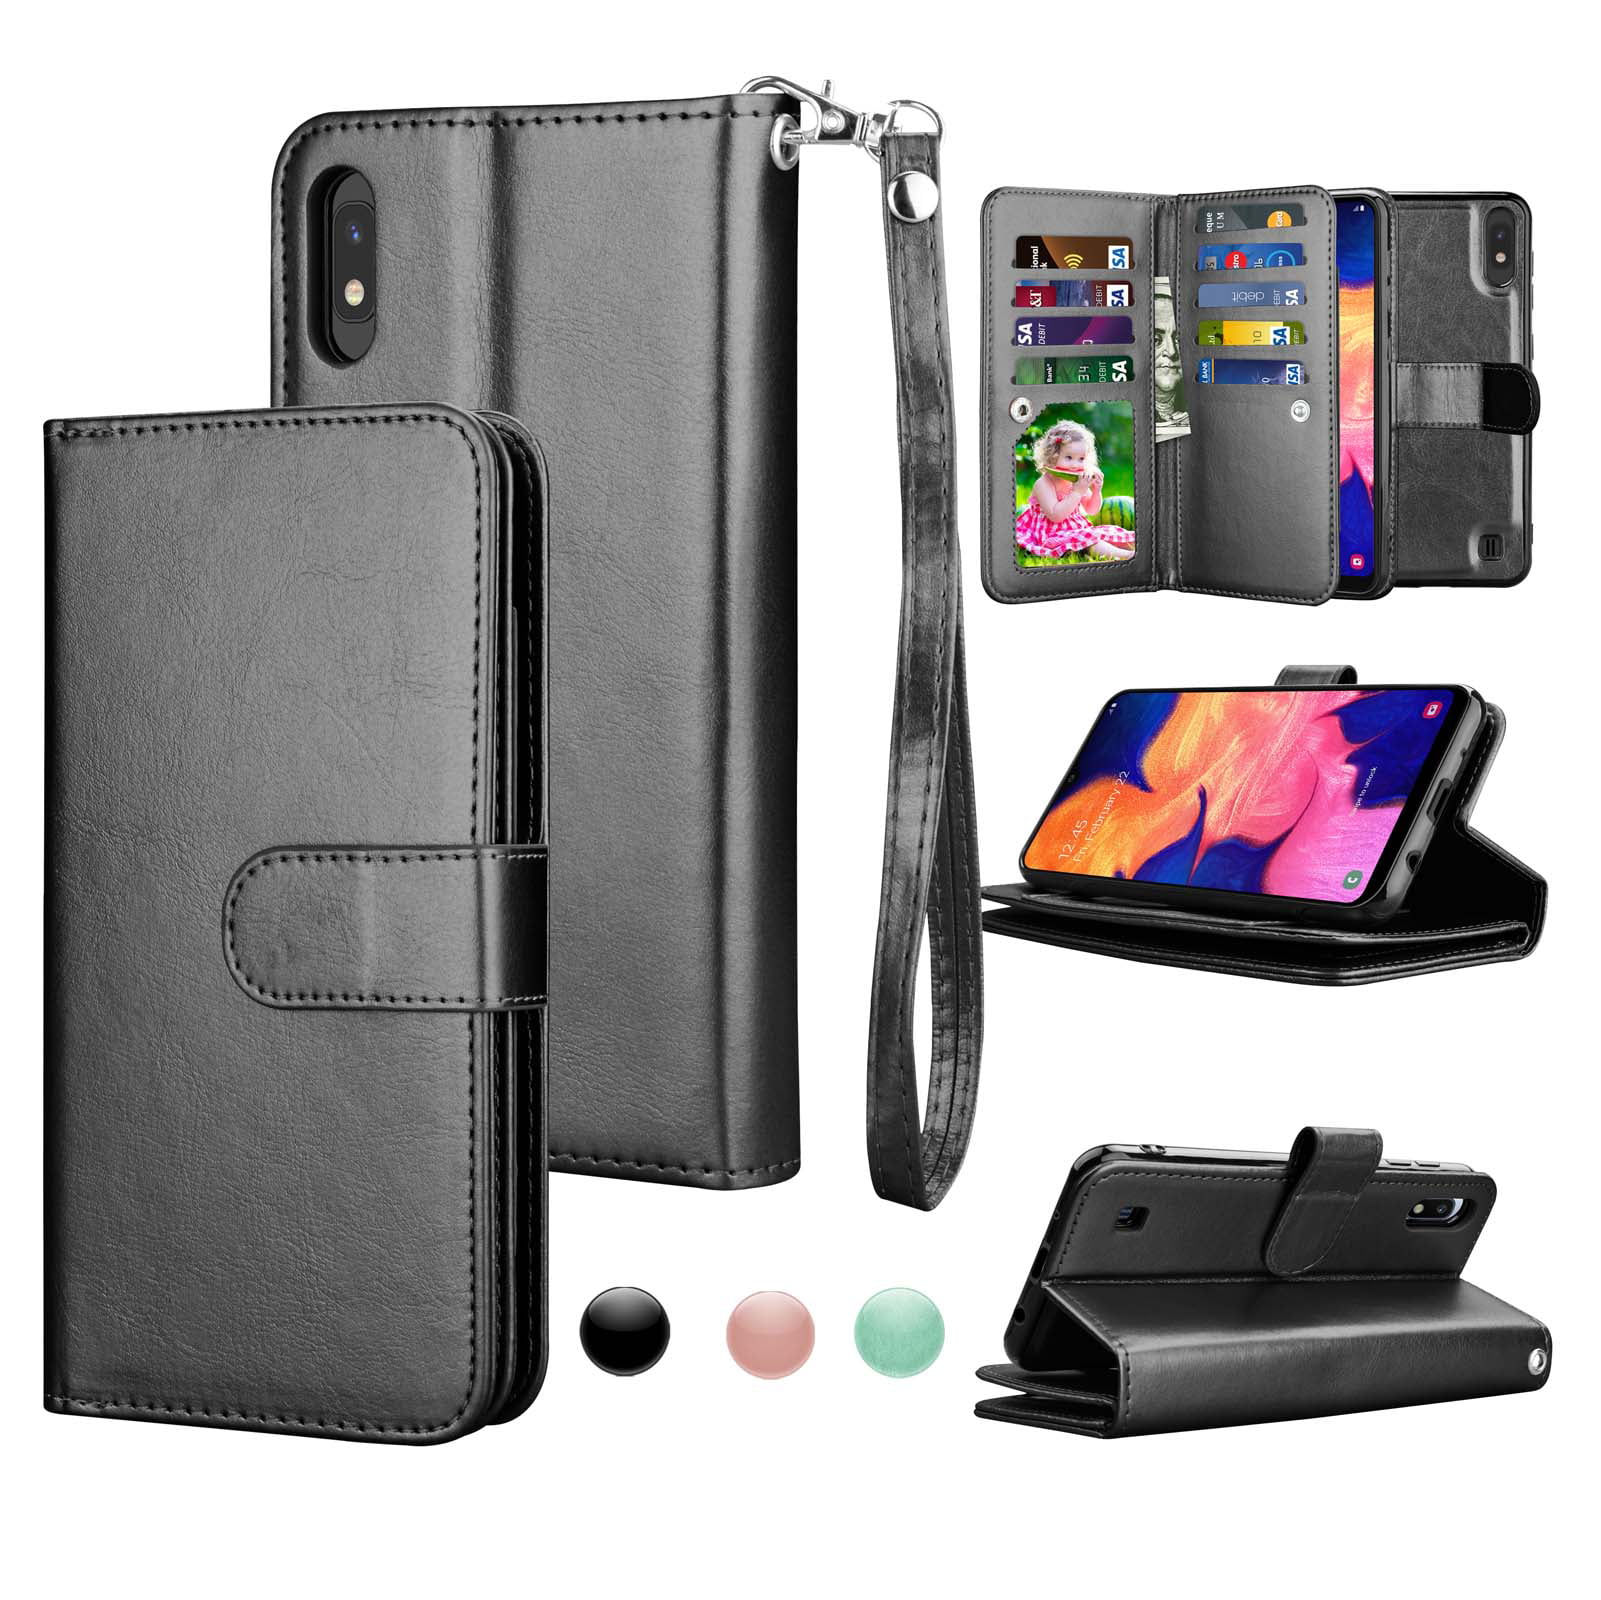 NWNK13 Samsung Galaxy A10 Case Slim Premium Leather Flip Case Notebook Wallet Book Case Soft Flexible Gel Frame Kickstand FunctionCard Holder ID Slot Protective Skin Cover Compatible for Samsung A10